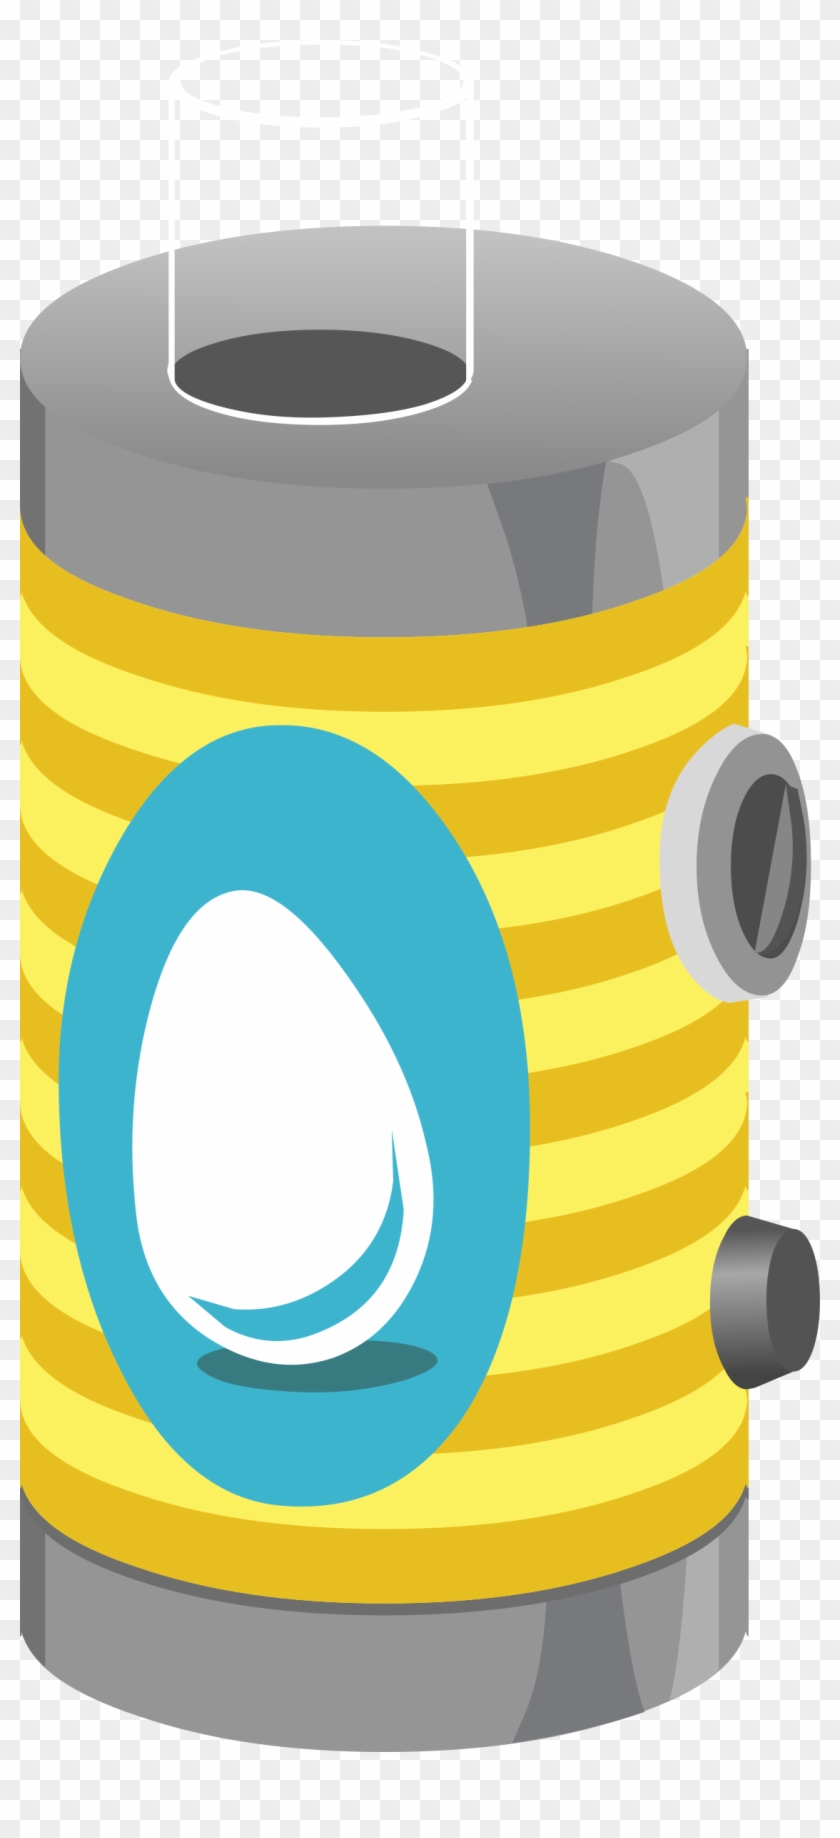 This Free Icons Png Design Of Tools Egg Seasoner Clipart